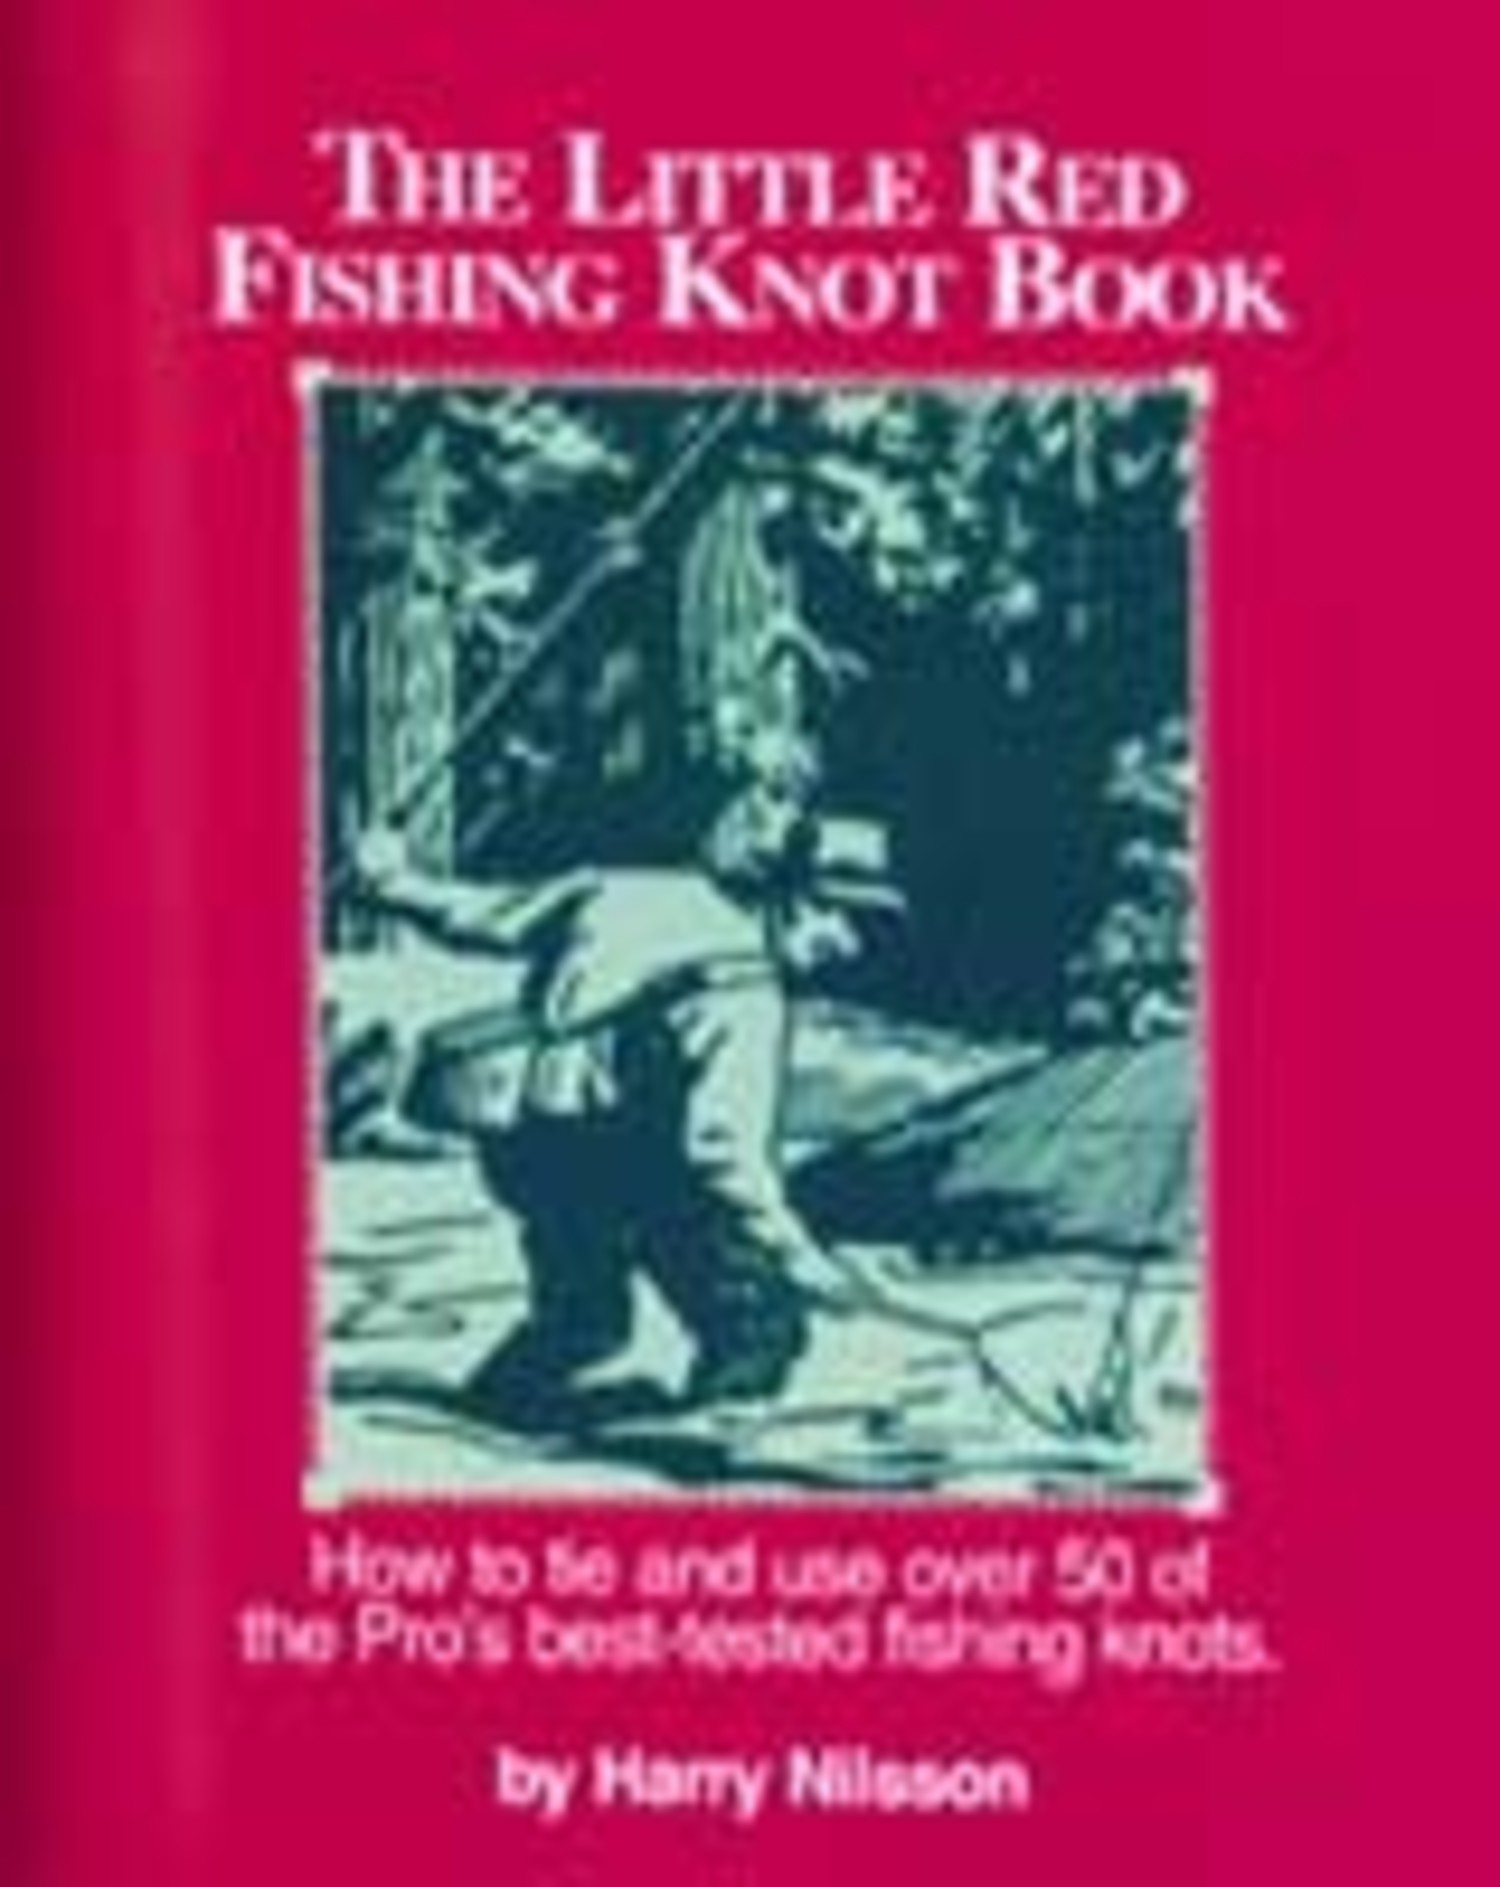 Anglers Books The Little Red Fishing Knot Book by Harry Nilsson